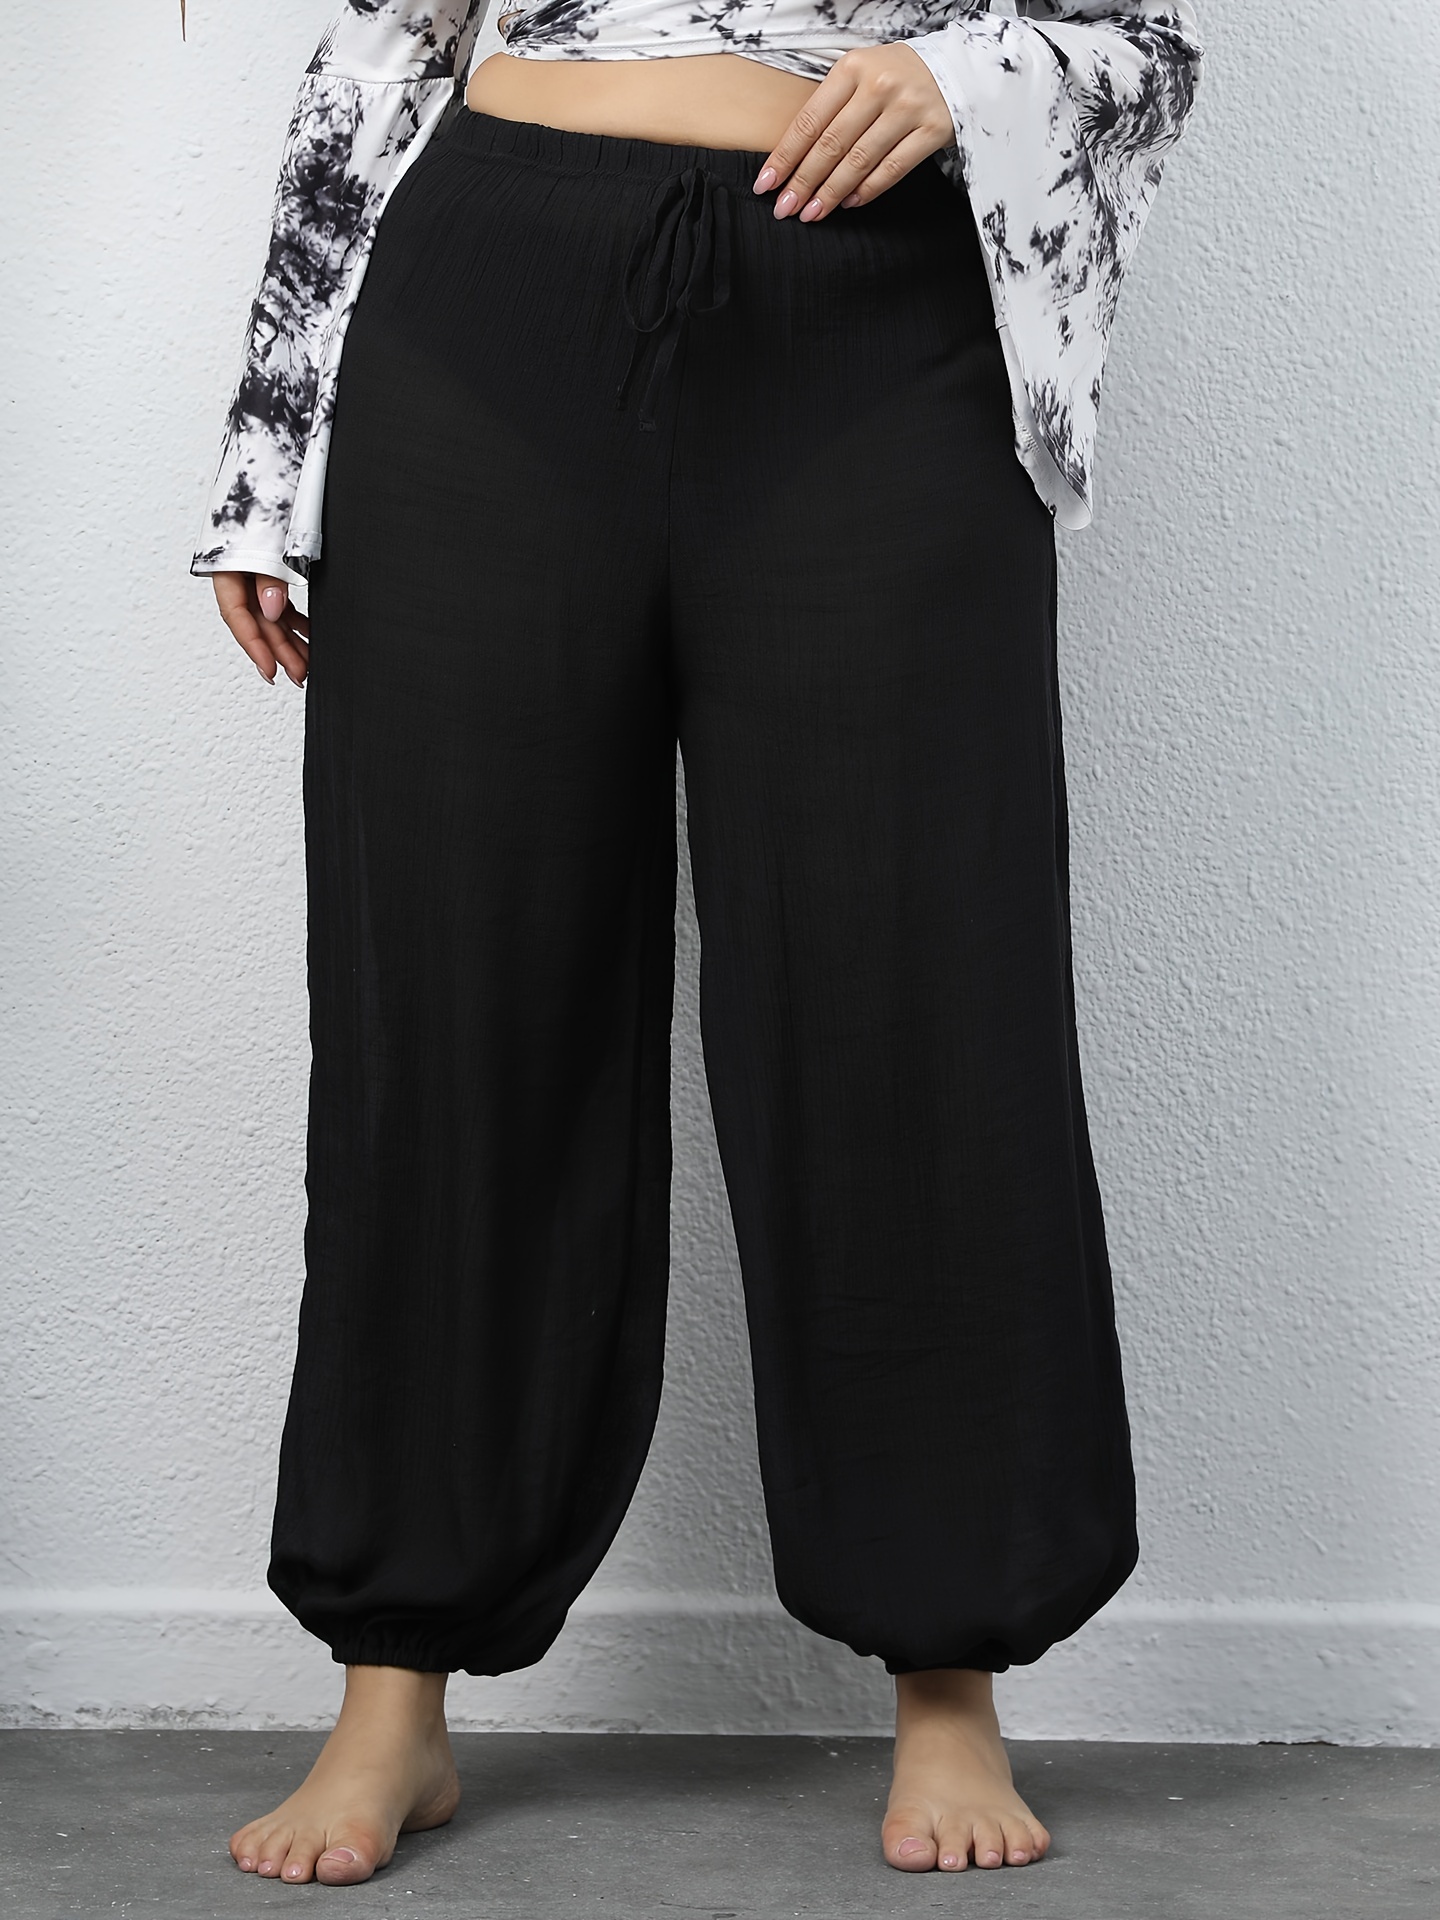 Plus Size Flowy Stretchy Wide Leg Palazzo Pants – Stretch Is Comfort